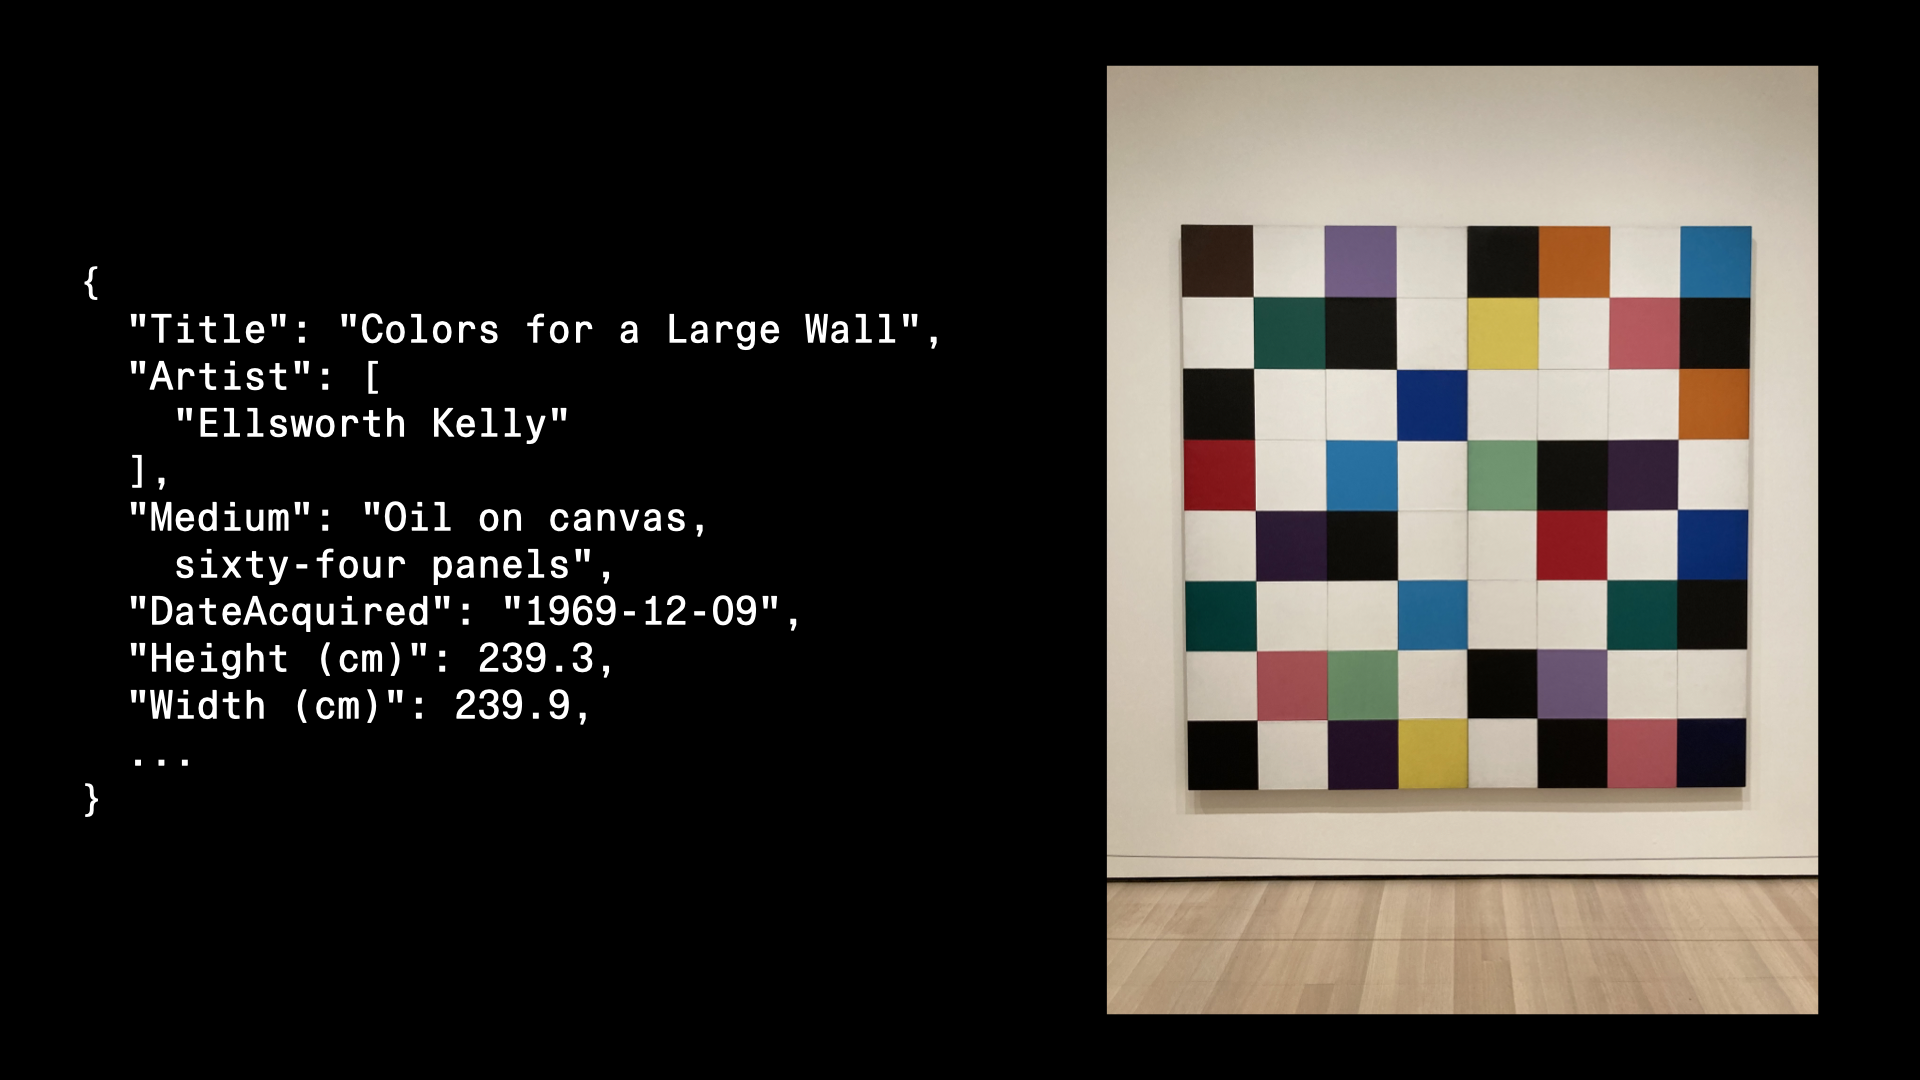 Raw code from a single artwork in MoMA’s collection data next to photograph of said artwork.